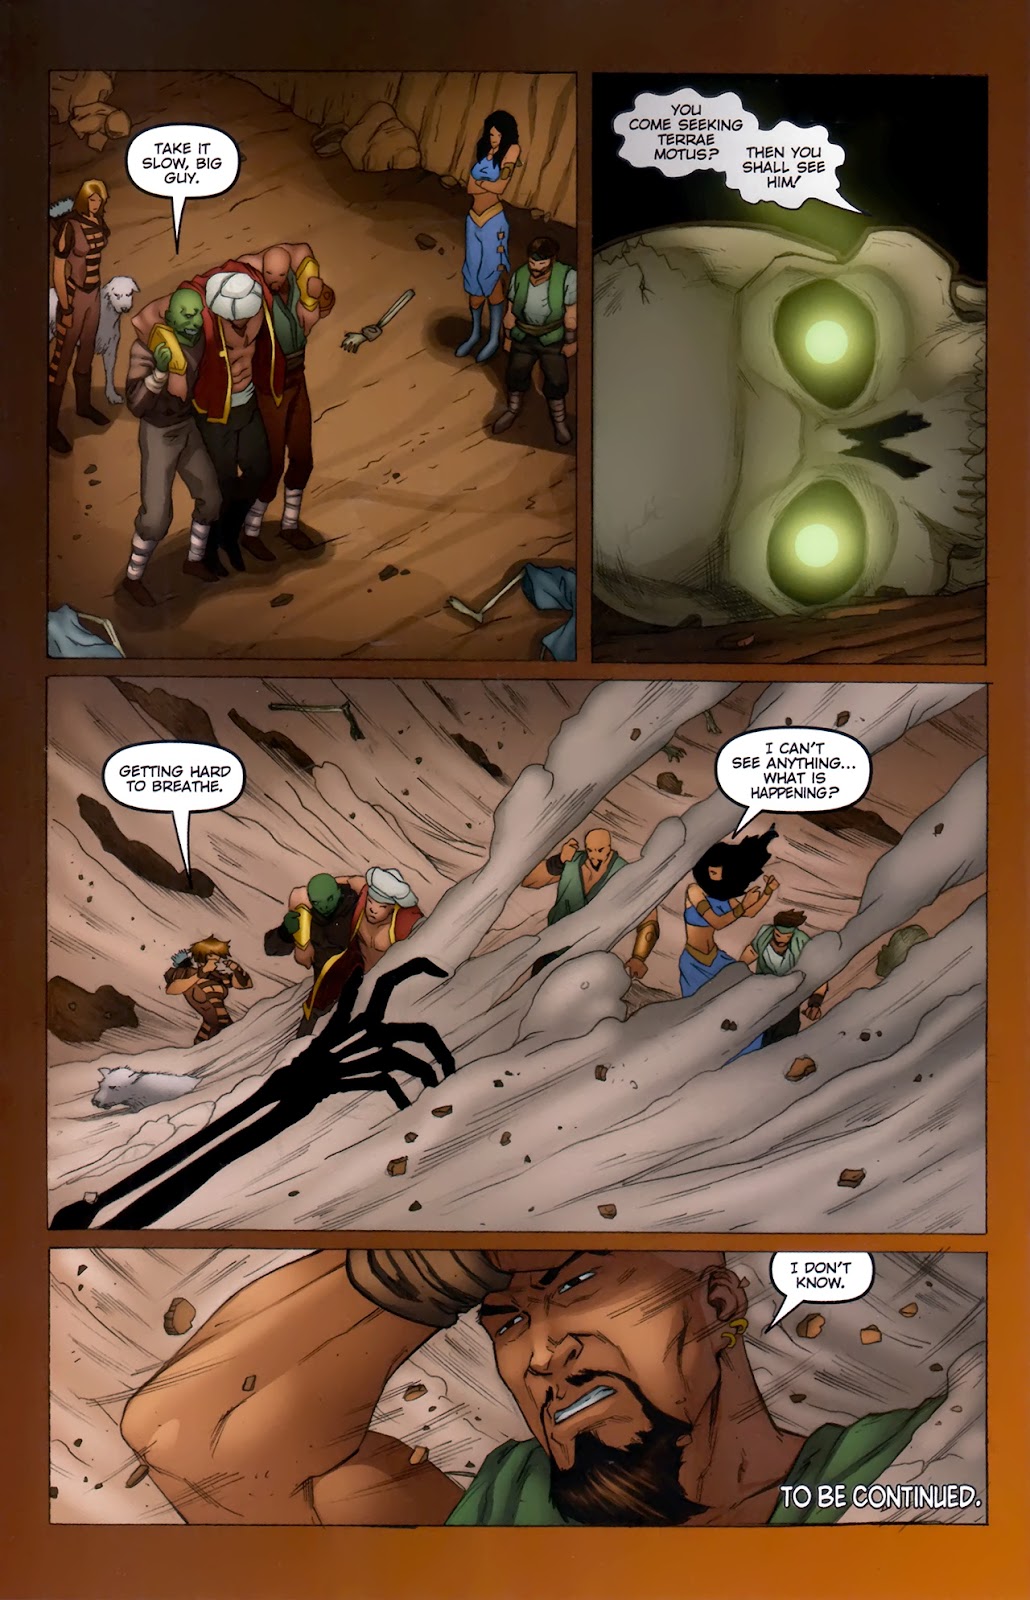 1001 Arabian Nights: The Adventures of Sinbad issue 11 - Page 24